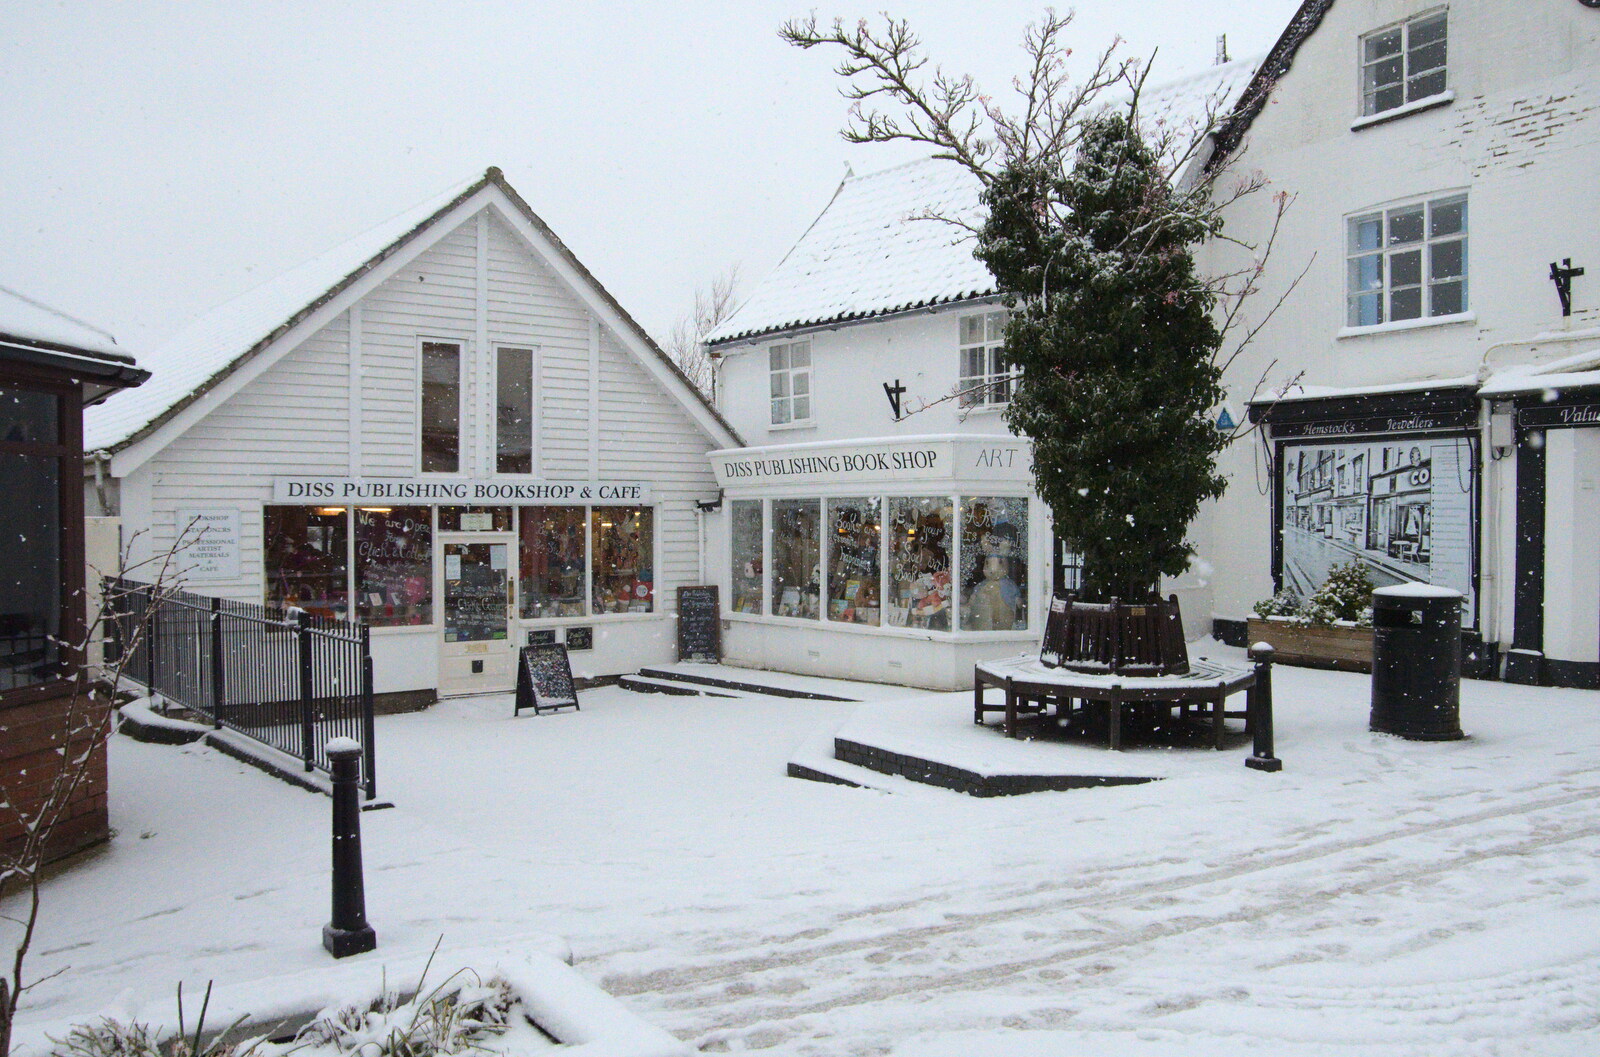 Diss Publishing bookshop from A Snowy Morning, Diss, Norfolk - 16th January 2021